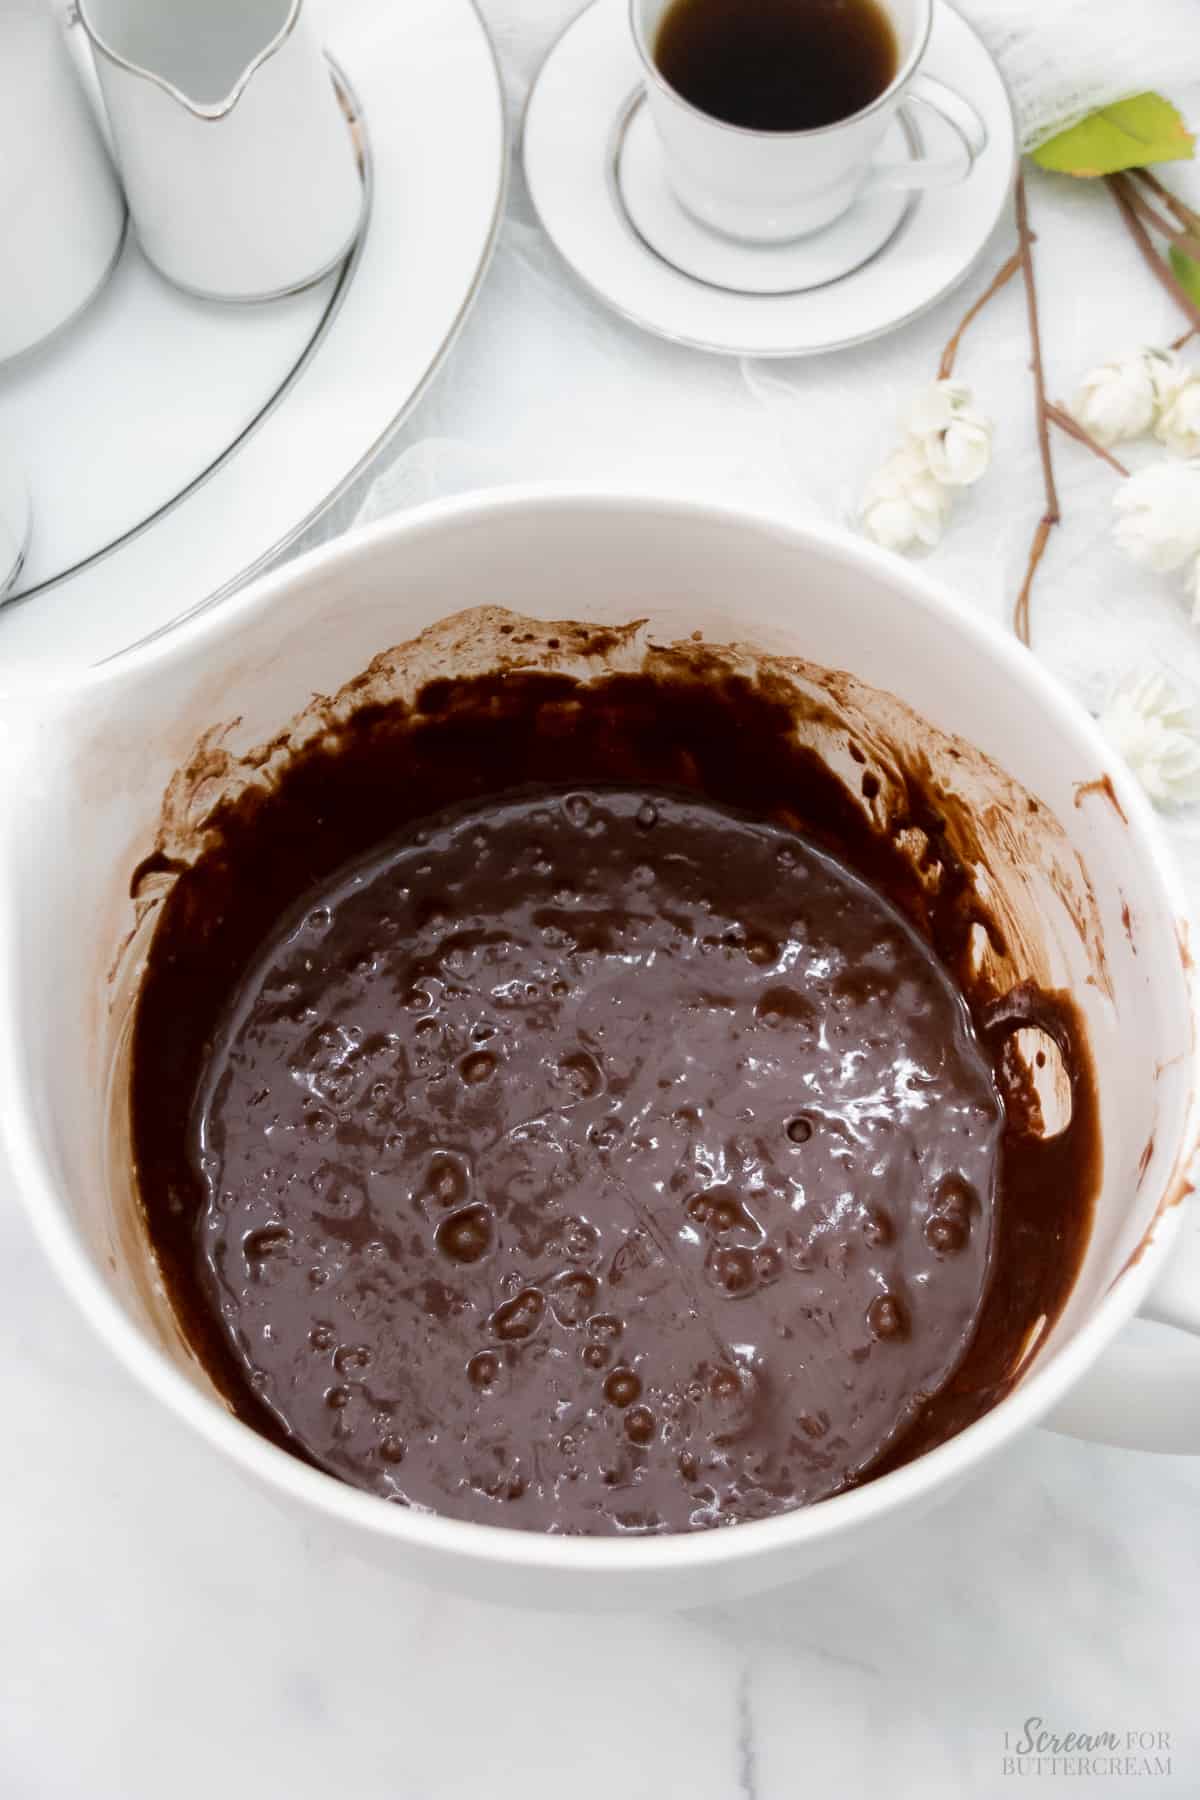 Chocolate cupcake batter in a large white mixing bowl.